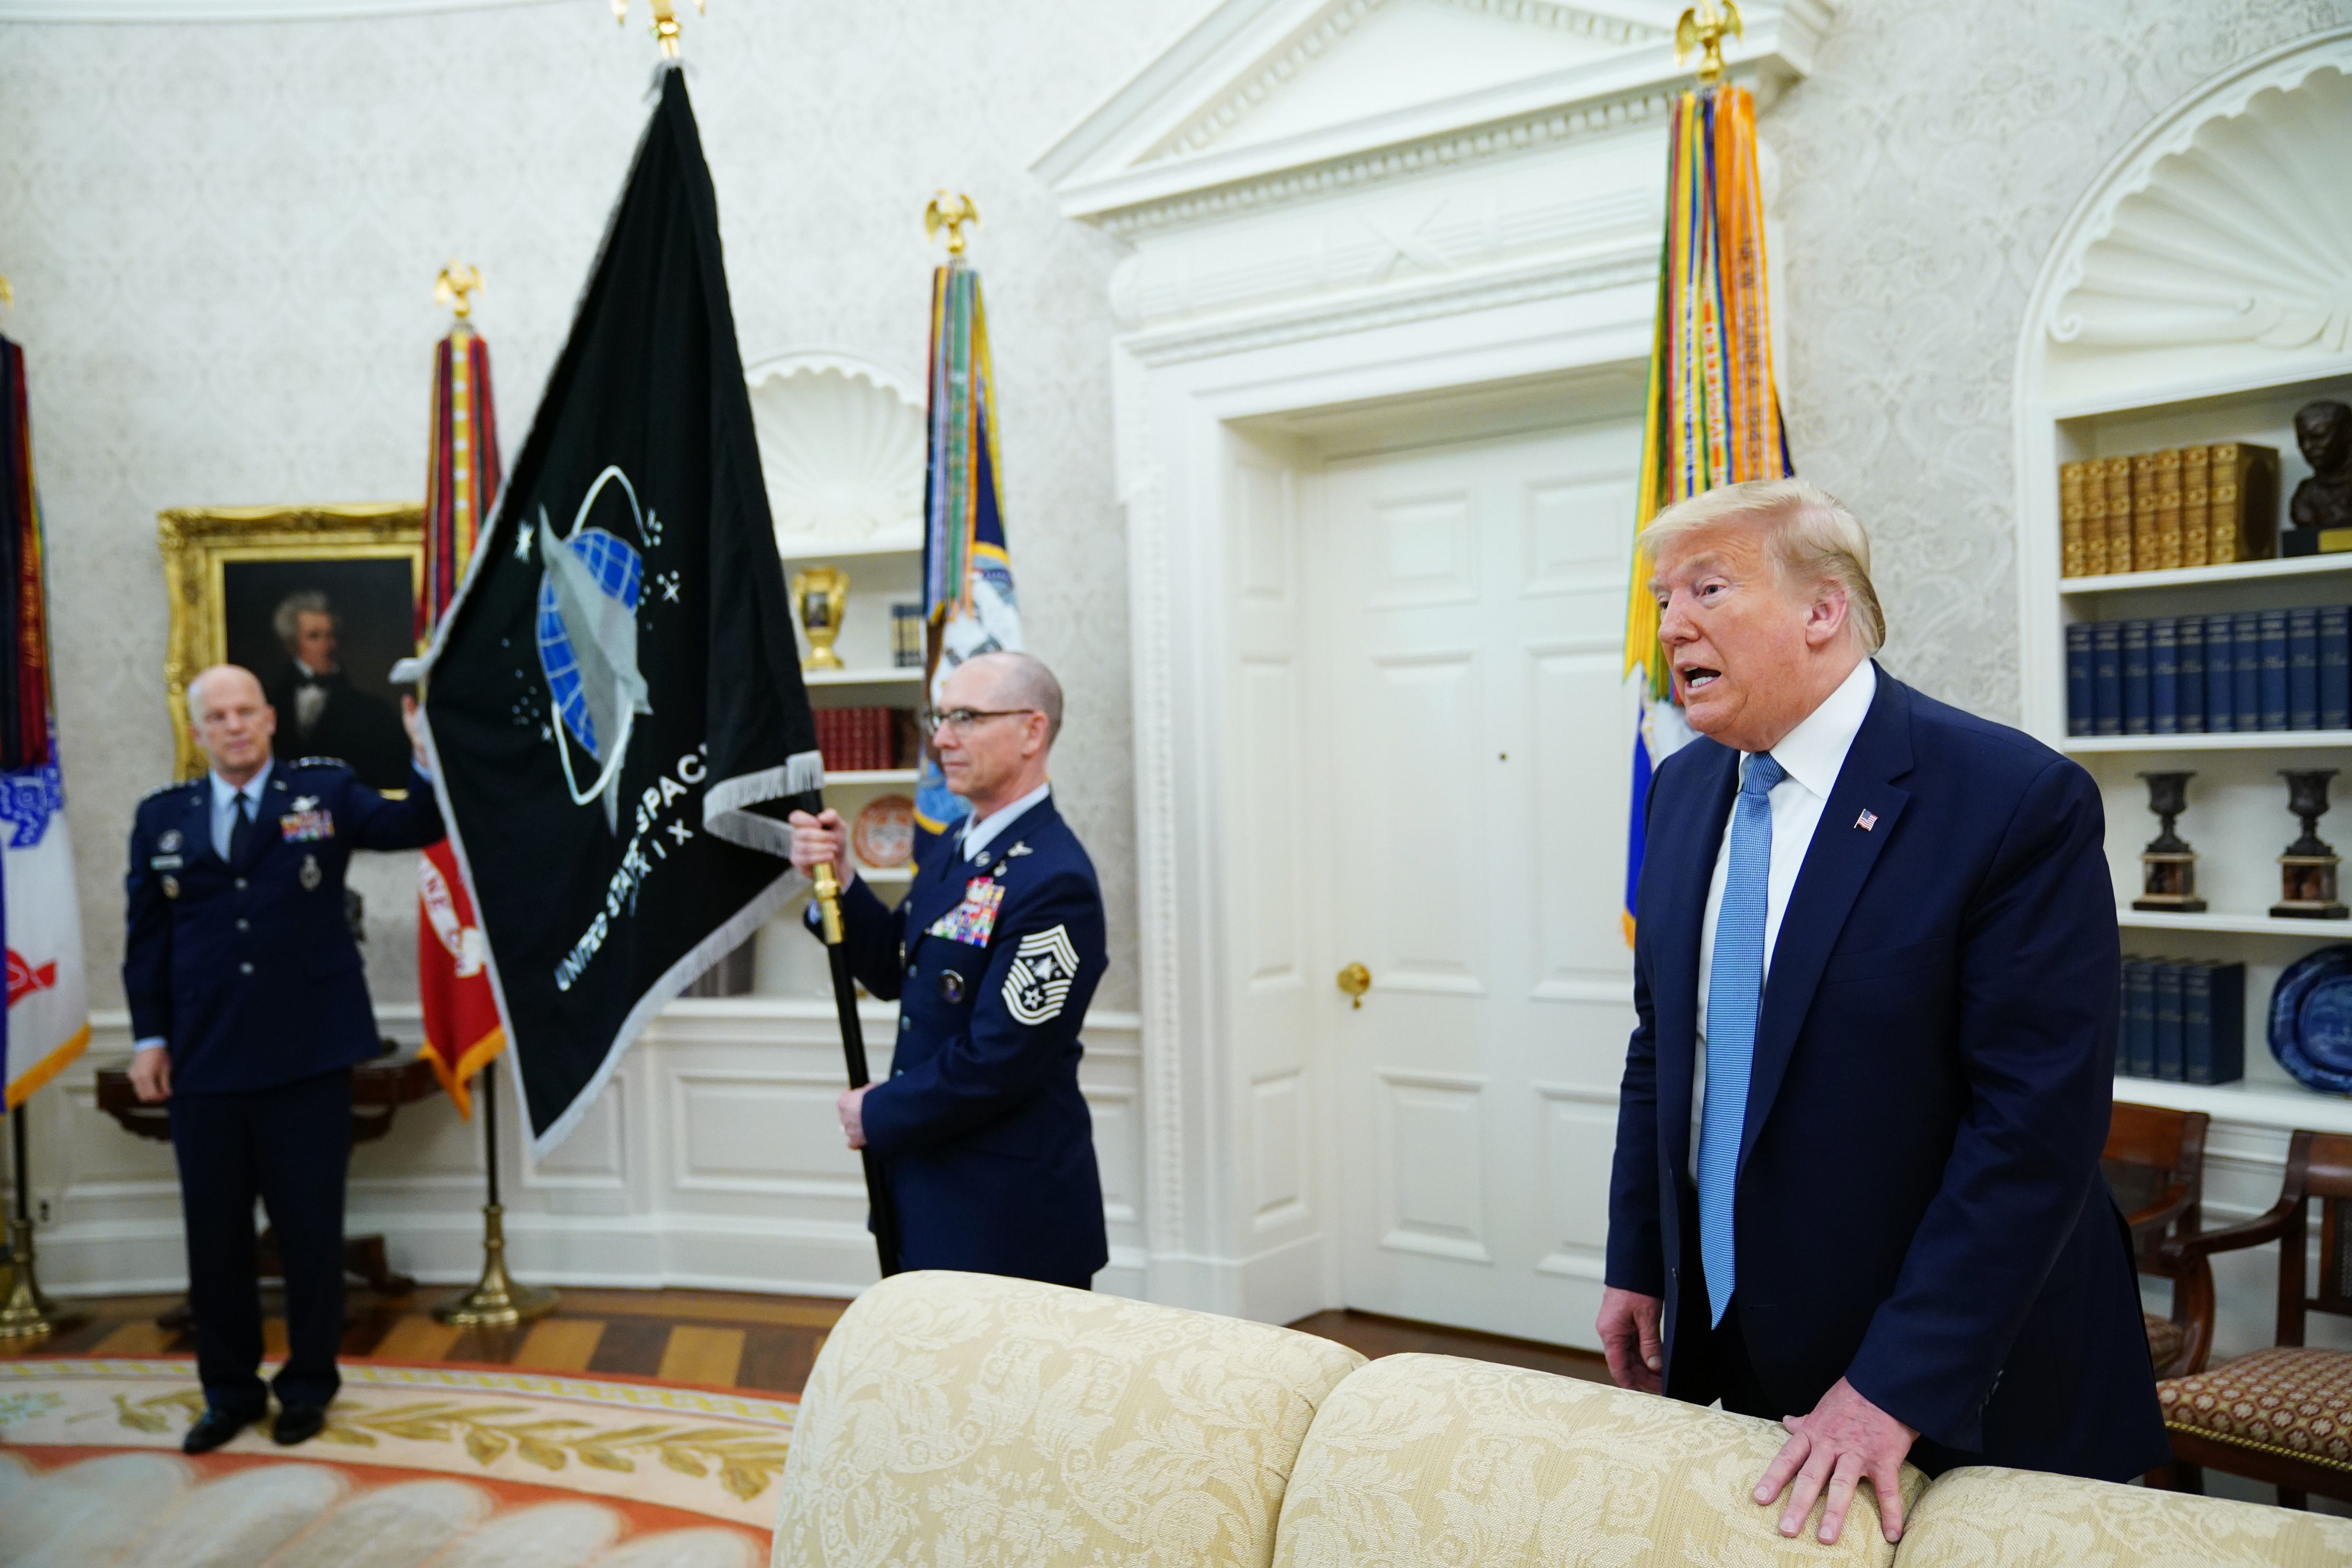 President Donald Trump speaks during a presentation of the U.S. Space Force Flag in the Oval Office in Washington, D.C. on May 15, 2020